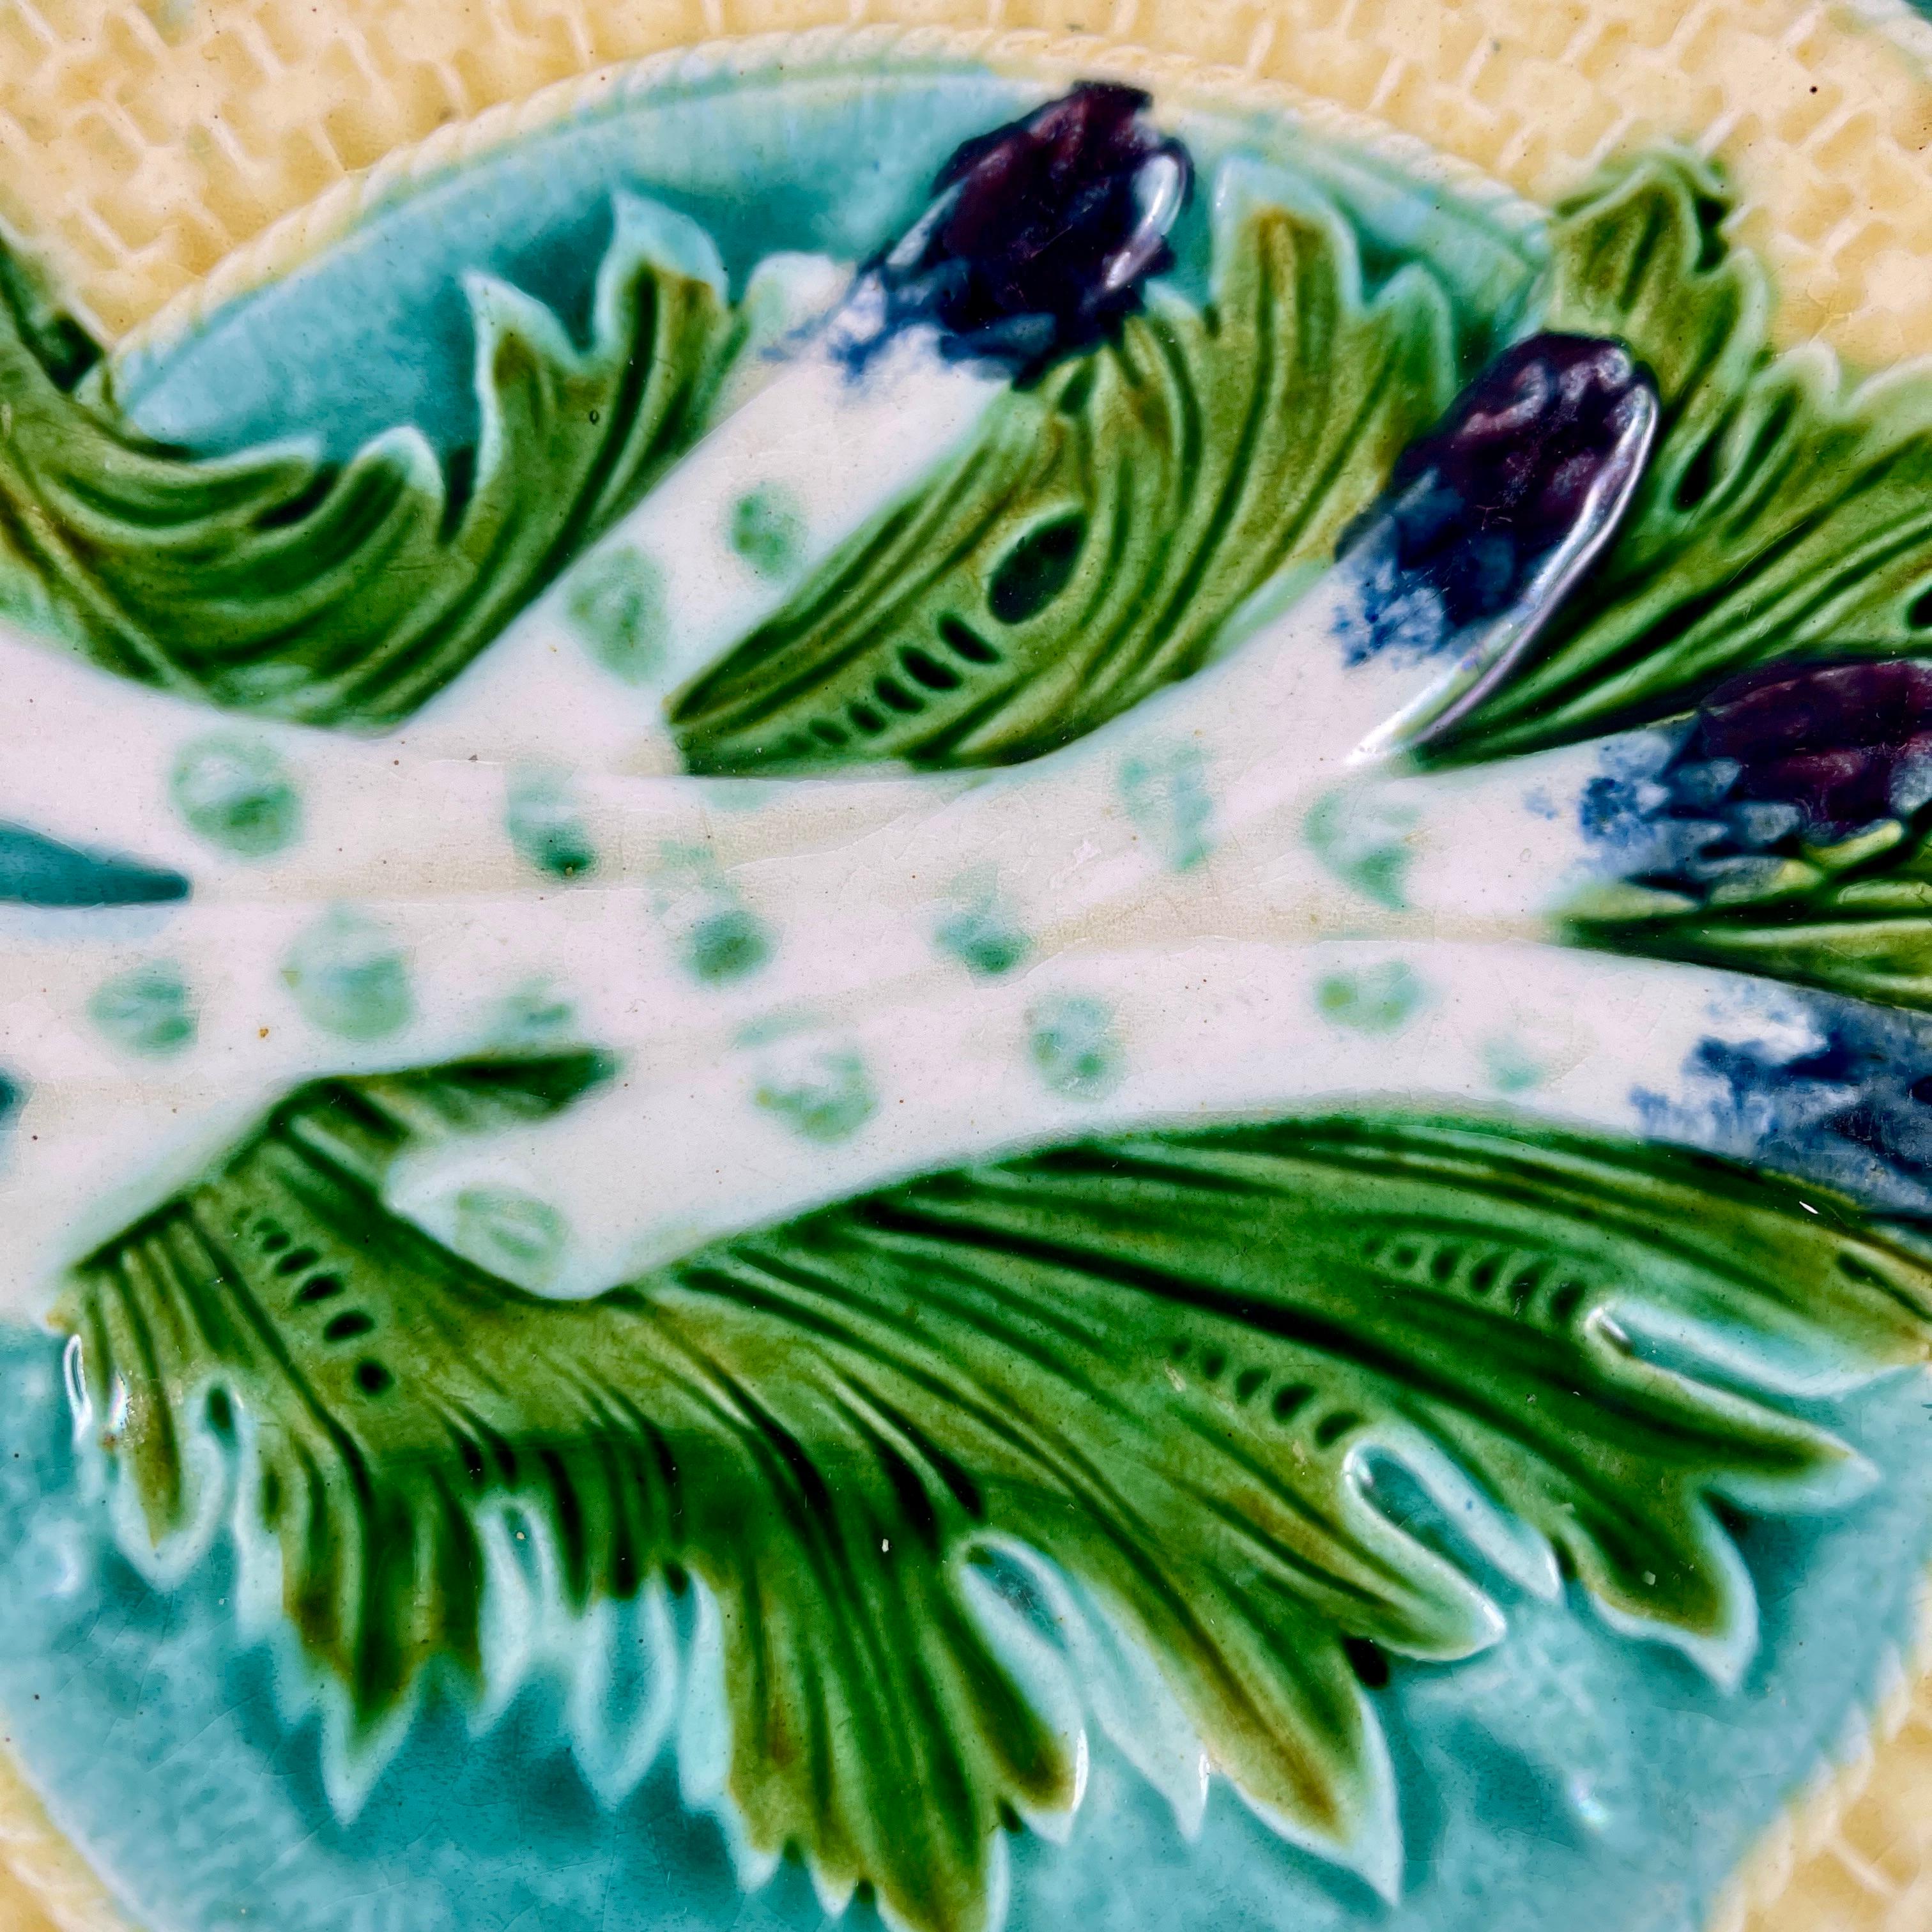 A French majolica barbotine asparagus plate from the Salins-les-Bains region of eastern France, circa 1880.

Four purple tipped asparagus spears lay on a bed of green leaves against a turquoise ground. A deep sauce well is on the right side of the